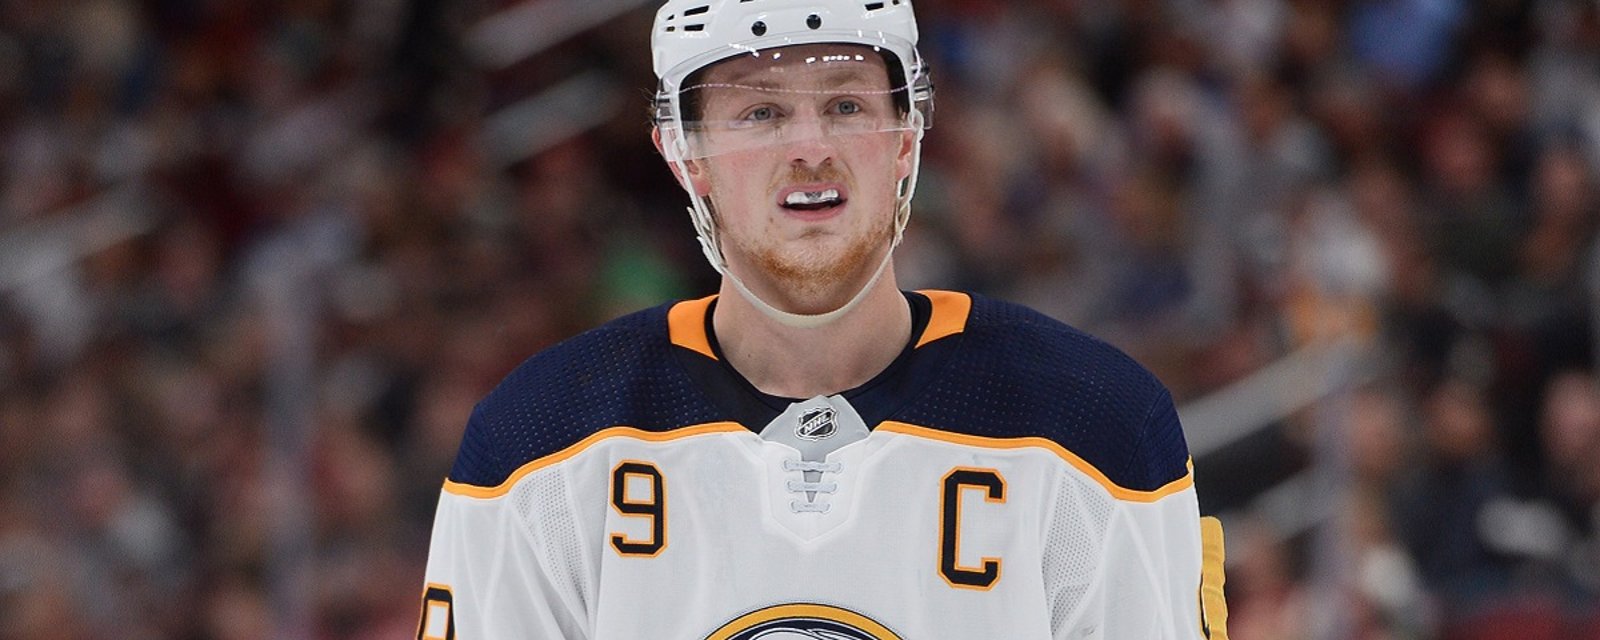 Jack Eichel headed for the first suspension of his NHL career.